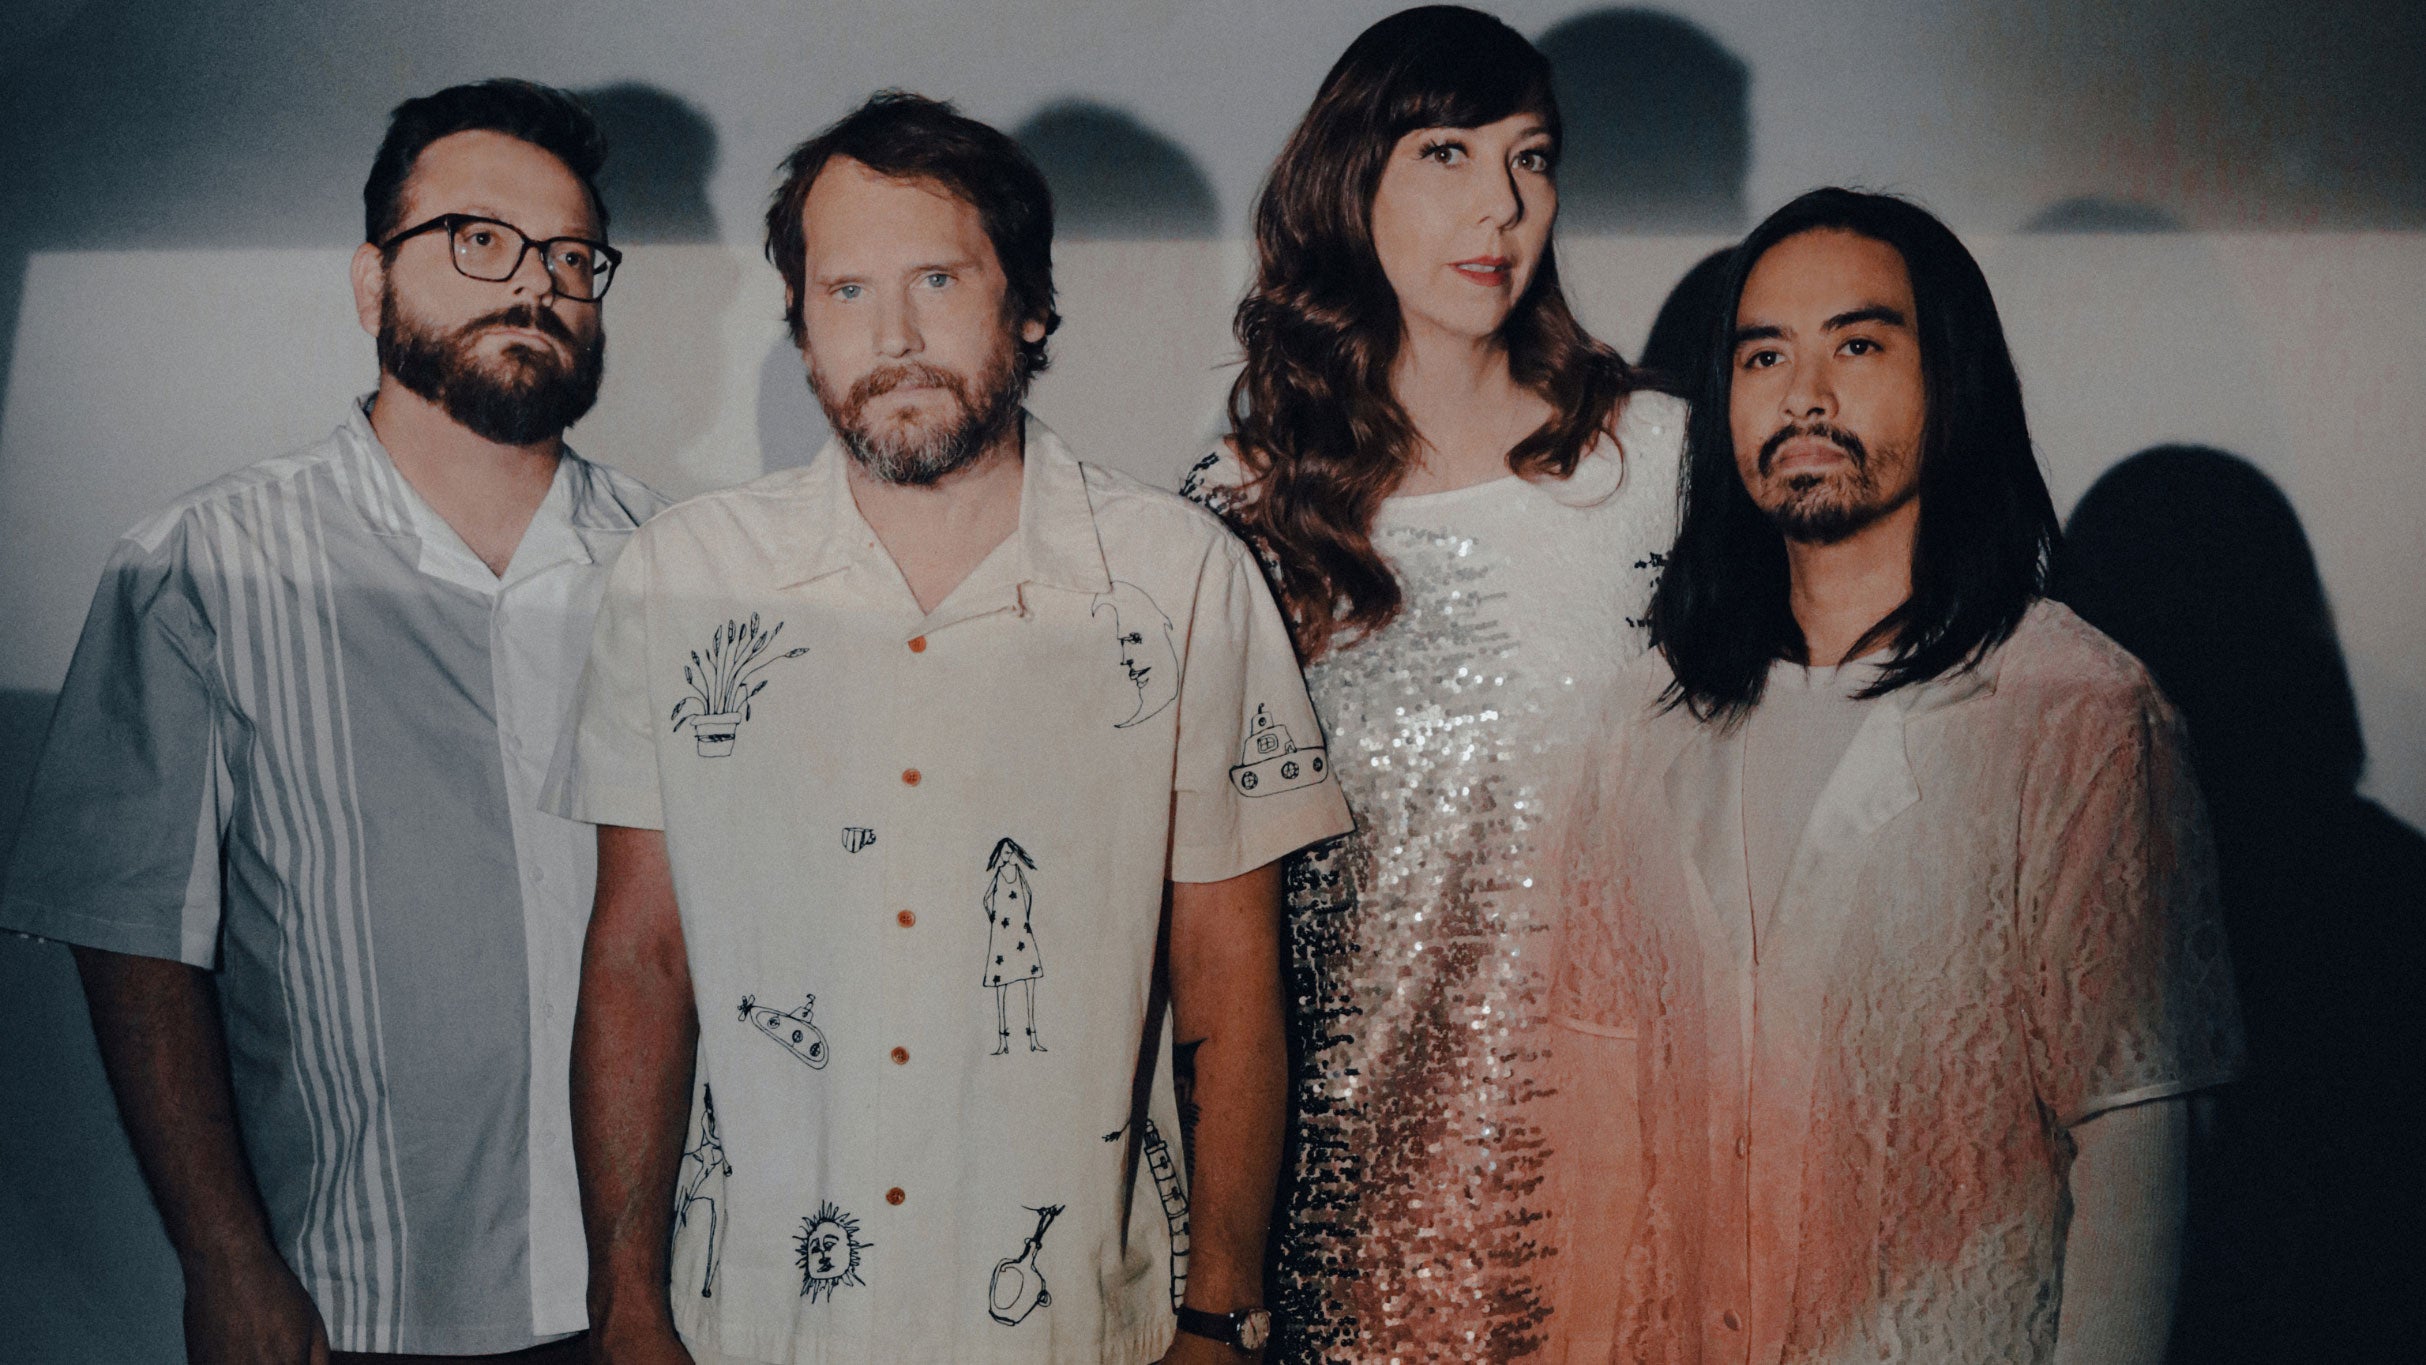 Silversun Pickups free presale code for early tickets in Santa Ana